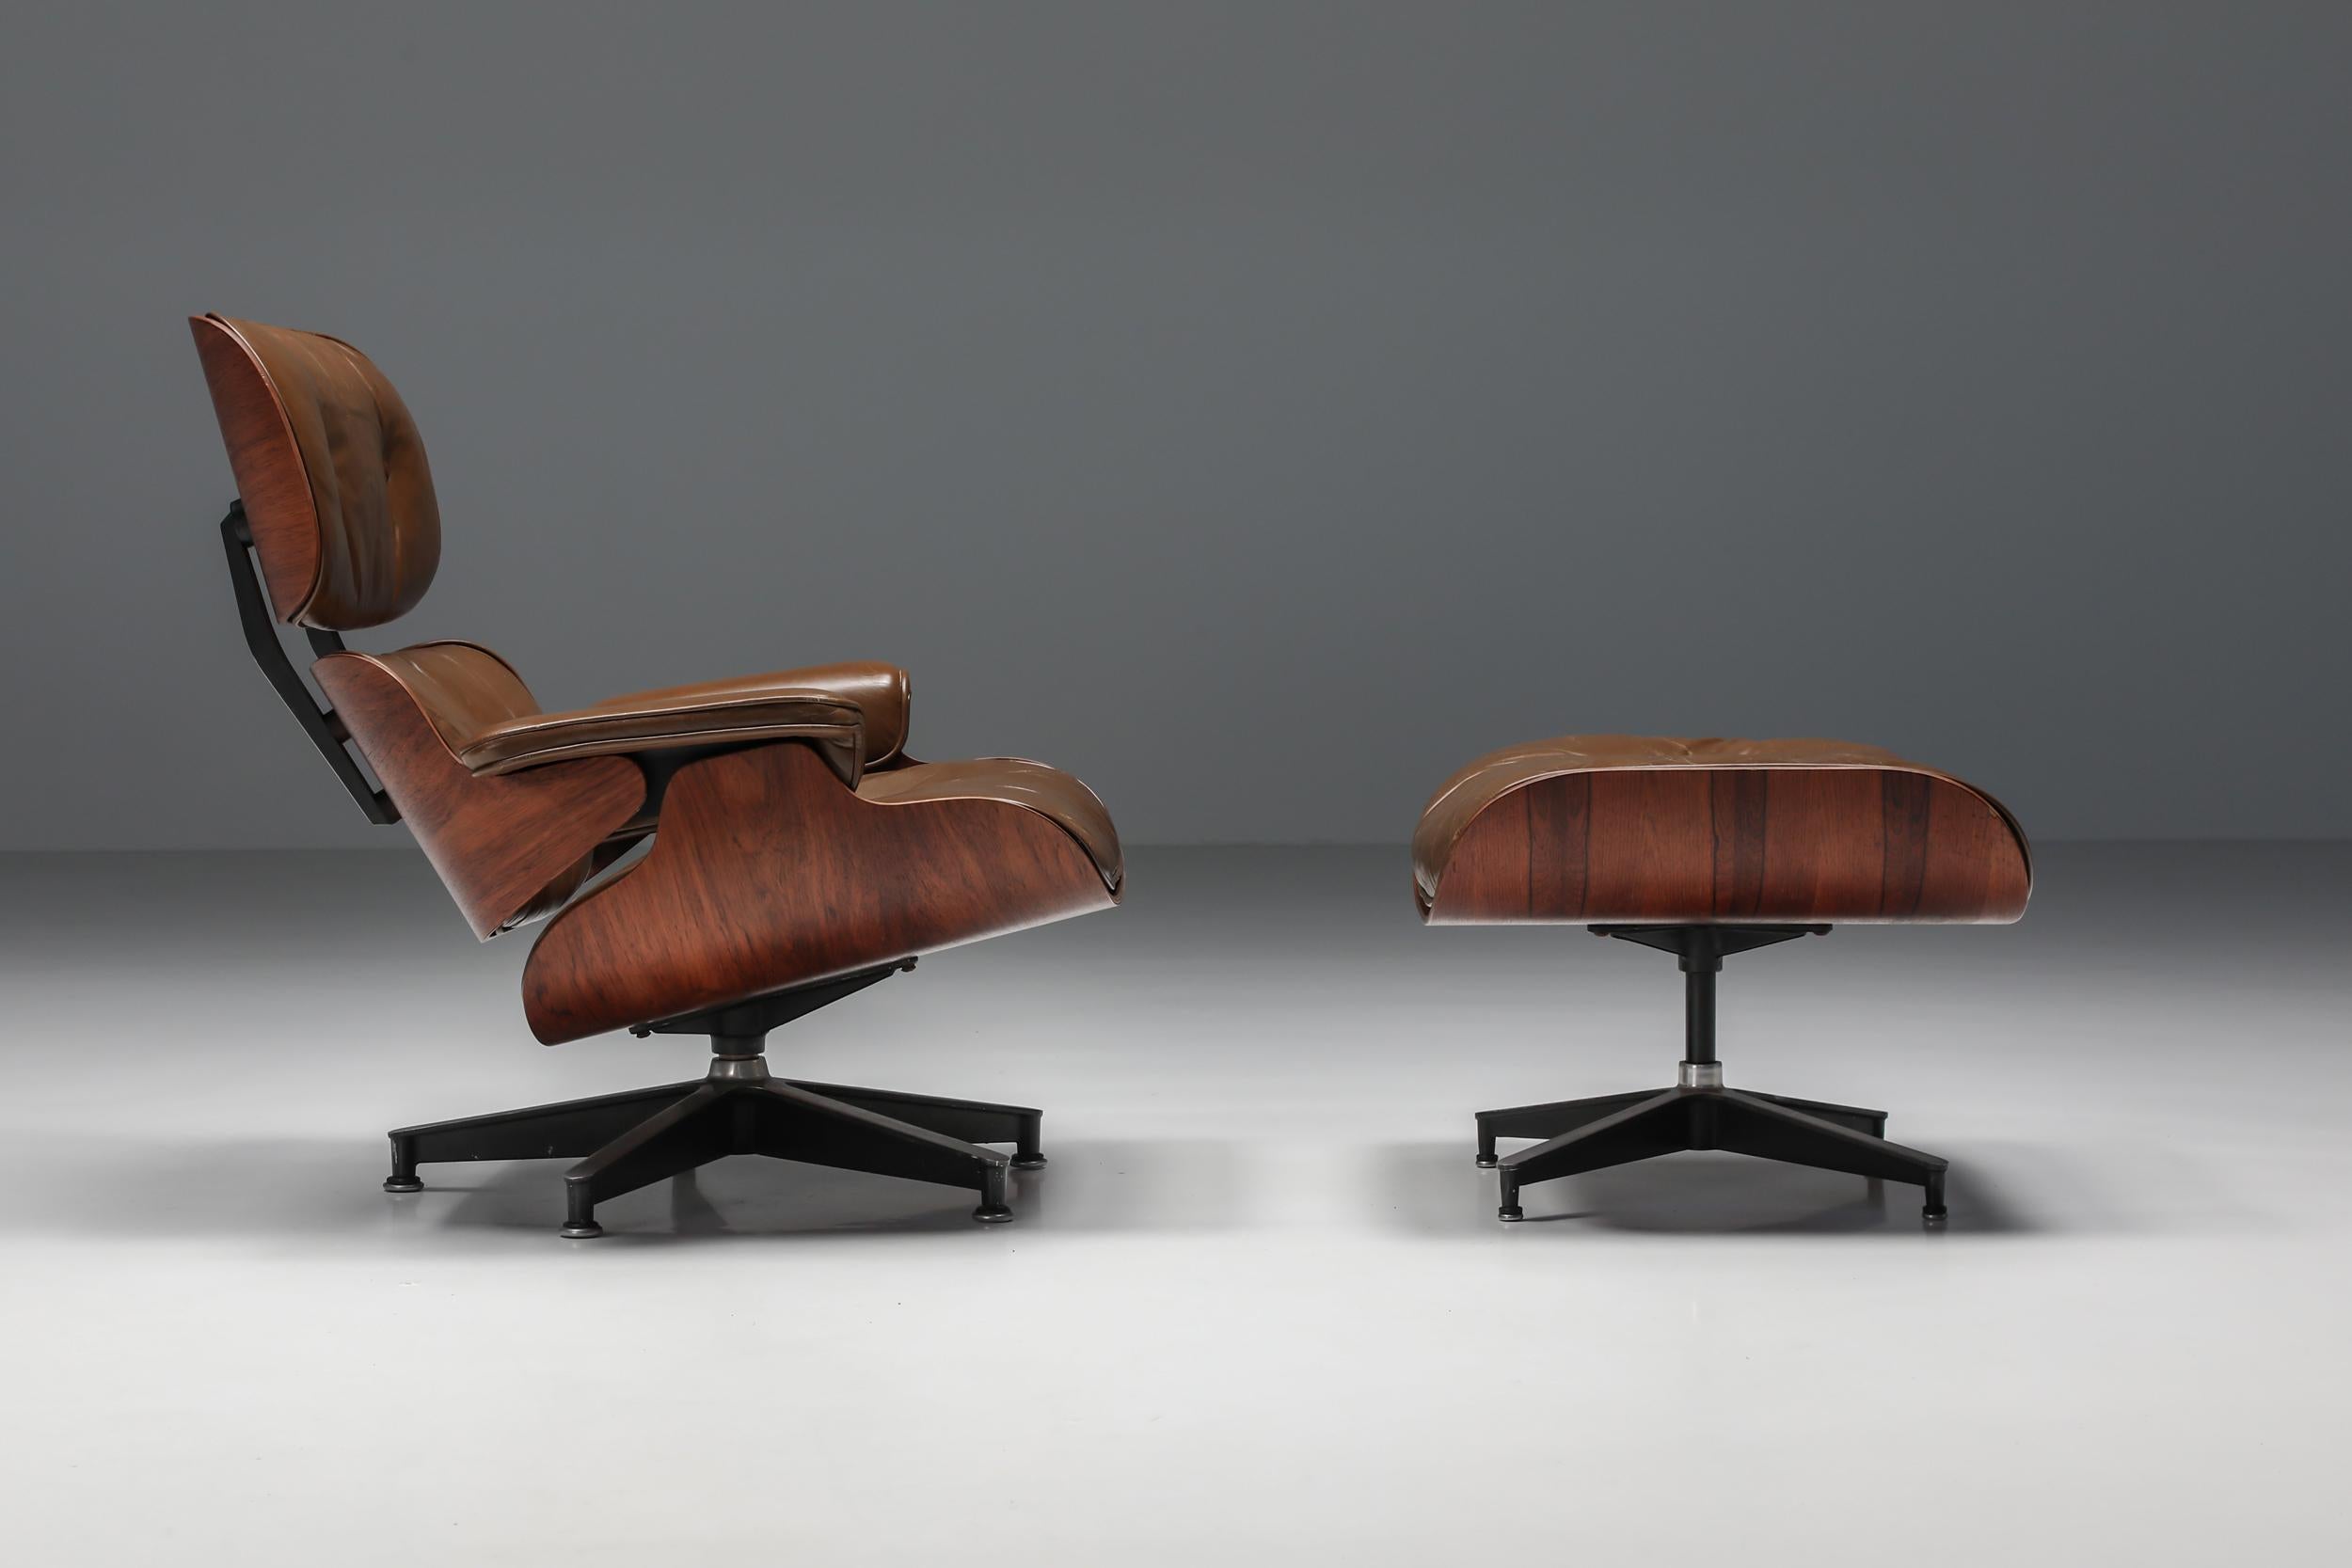 Eames; Herman Miller; Charles & Ray Eames; Mid-Century Modern, Lounge Chair with Ottoman; Iconic Design; Historical furniture; Collector's item; Design classic; Herman Miller Collection; 1960's

Eames lounge chair & ottoman by Herman Miller in